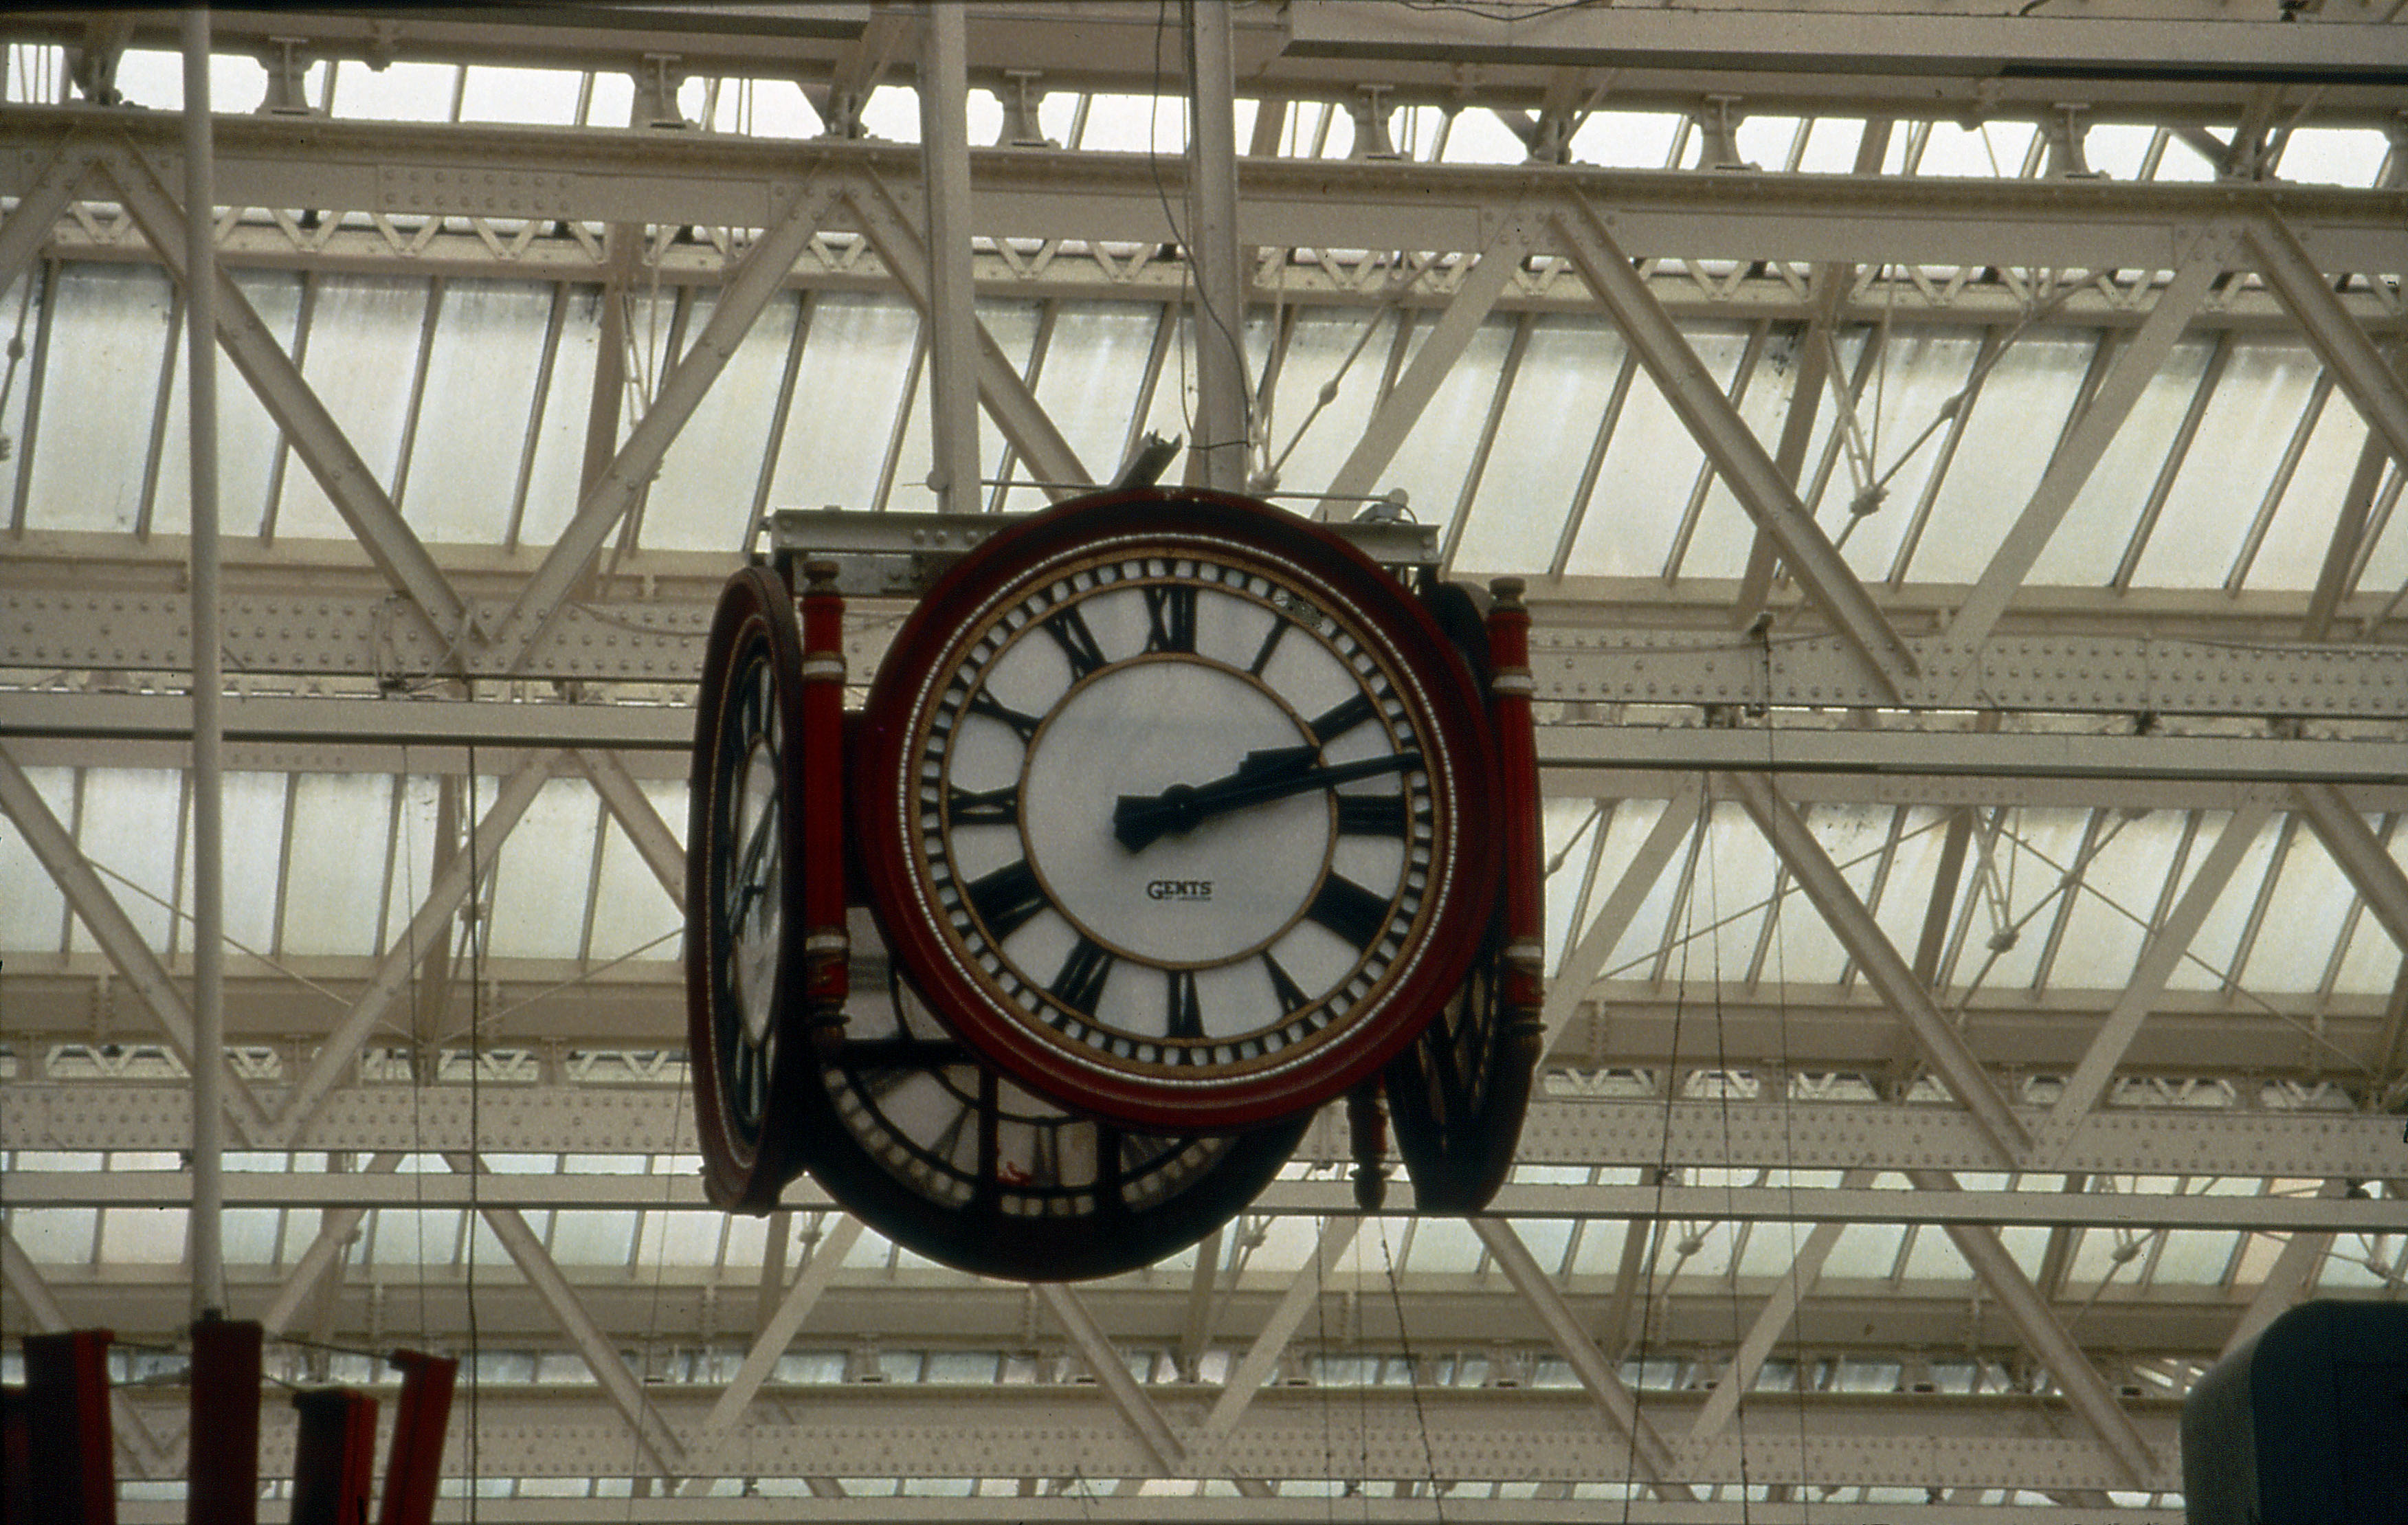 The clock at Waterloo Station, where Tom and Lillian met before dates.